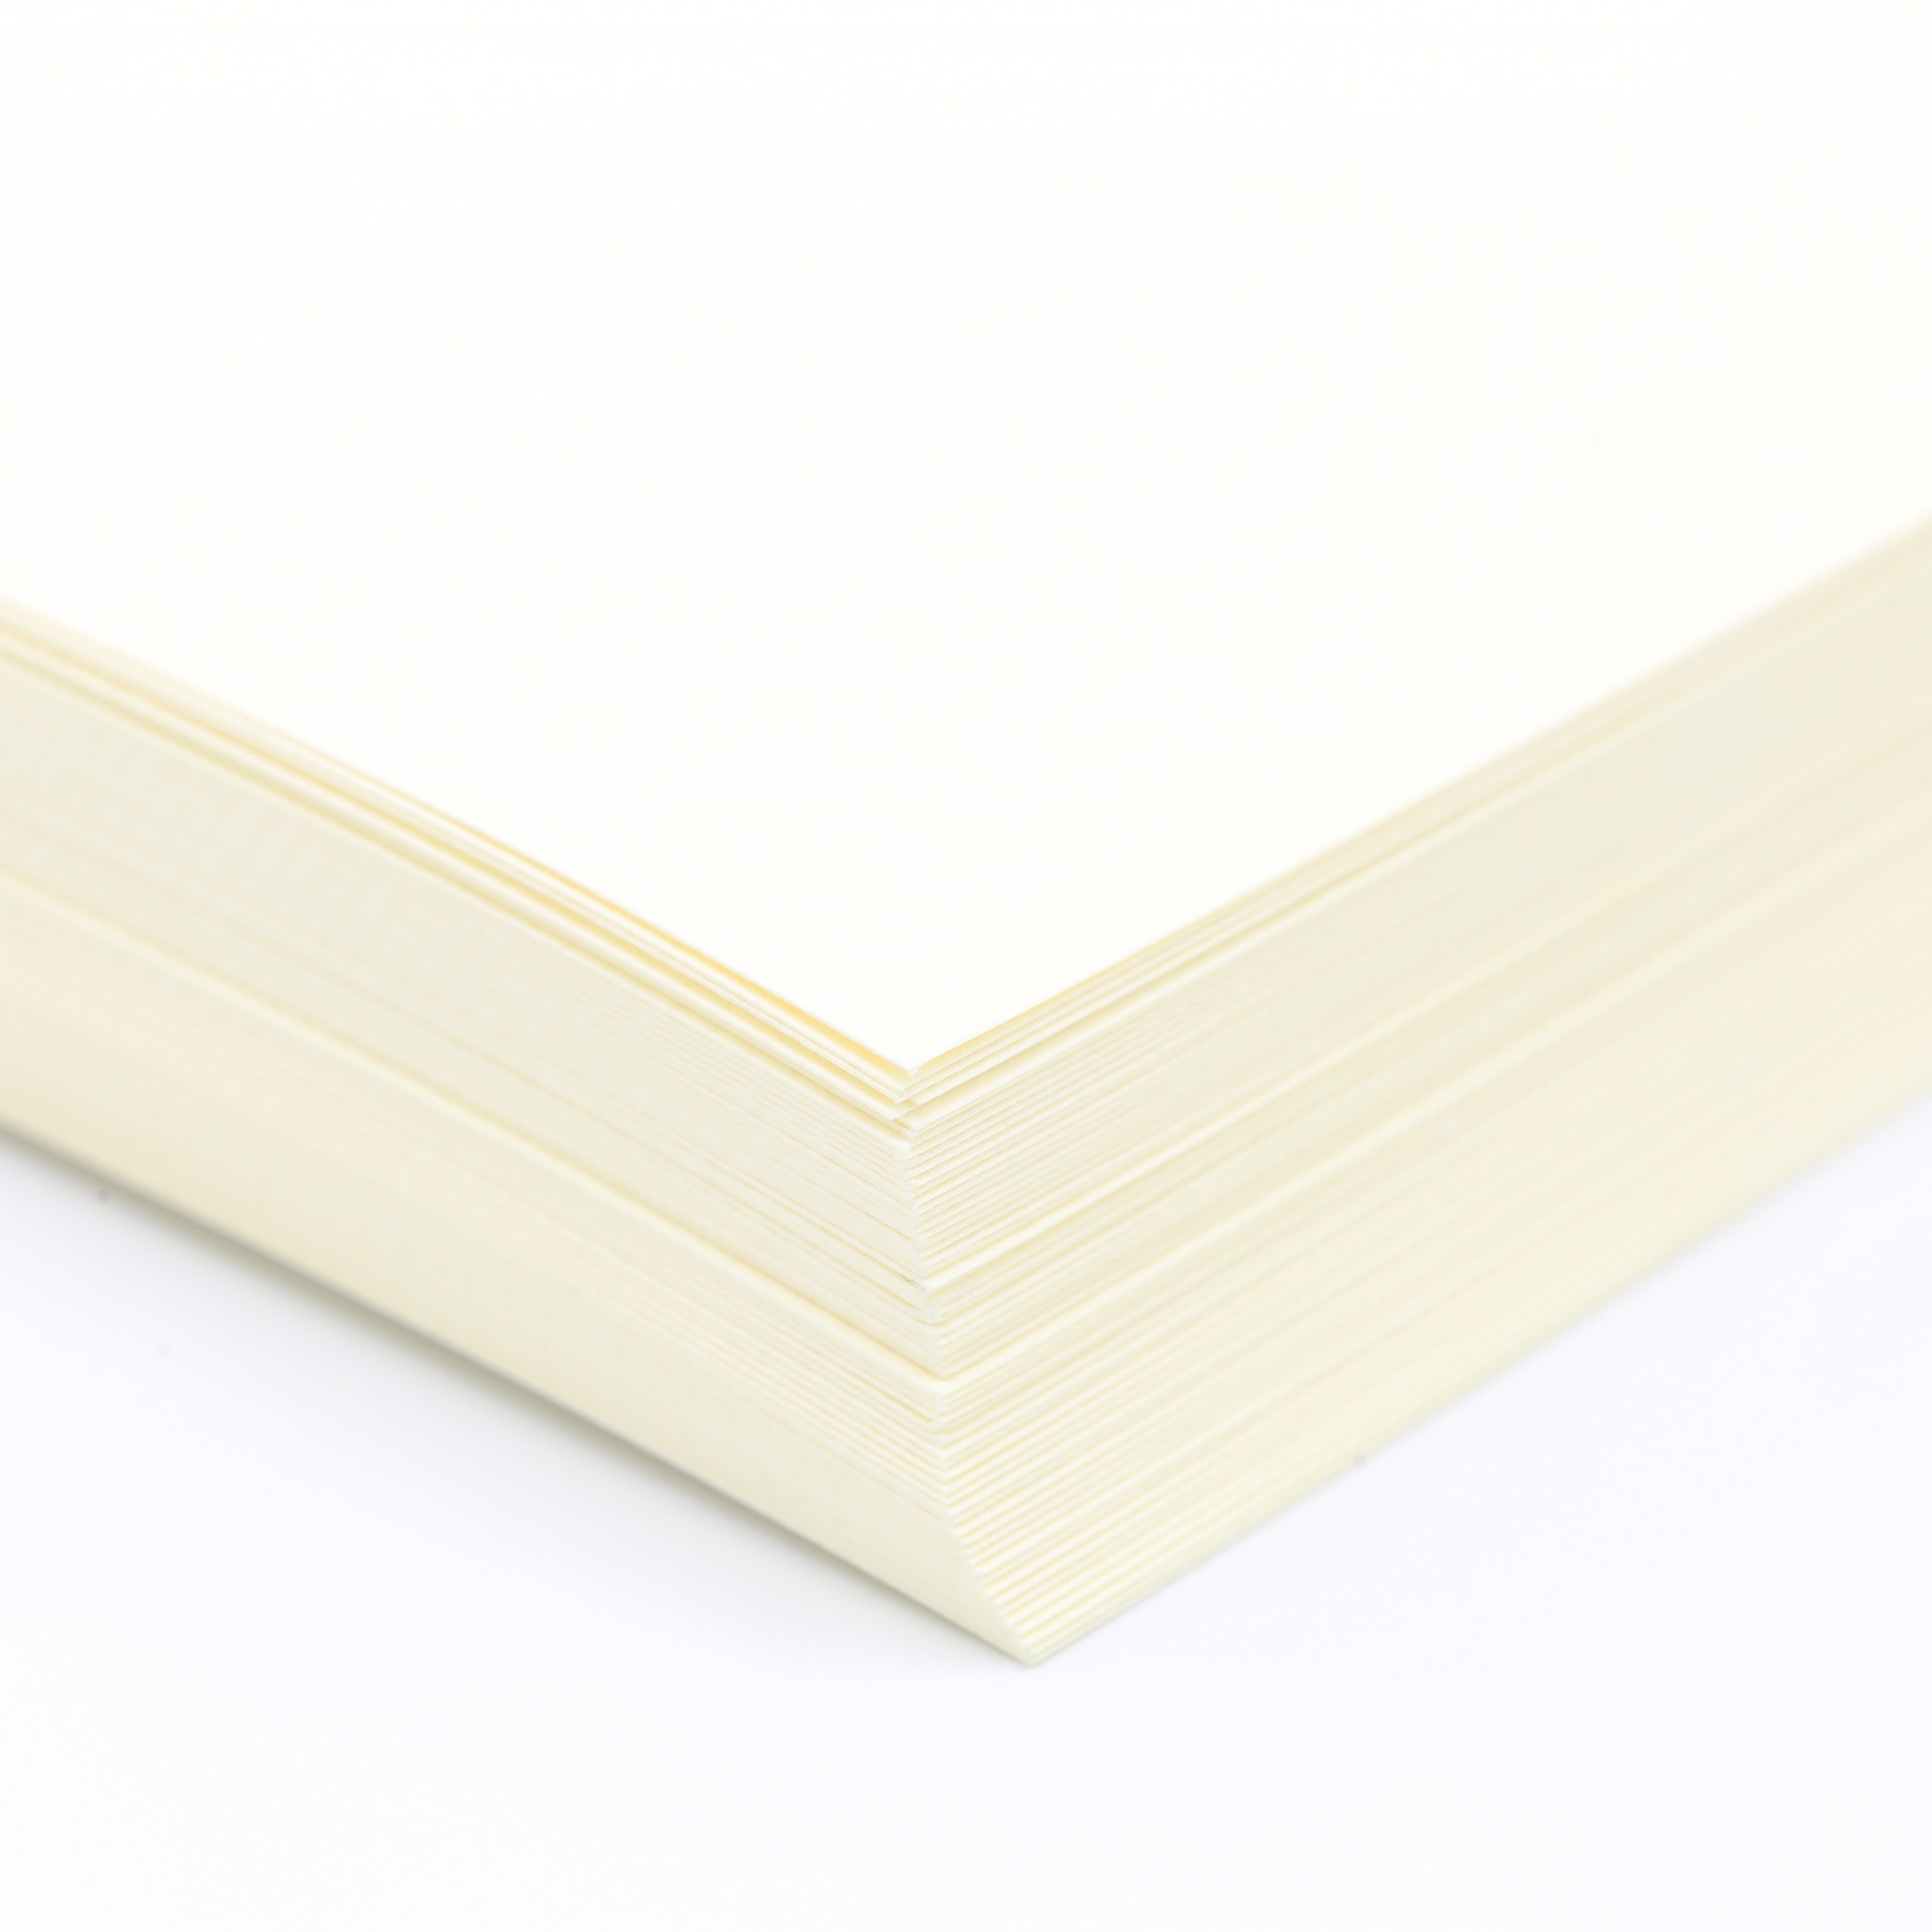 Classic Linen Cover 80lb Baronial Ivory 11x17 250/pkg | Paper, Envelopes,  Cardstock & Wide format | Quick shipping nationwide | Paperworks